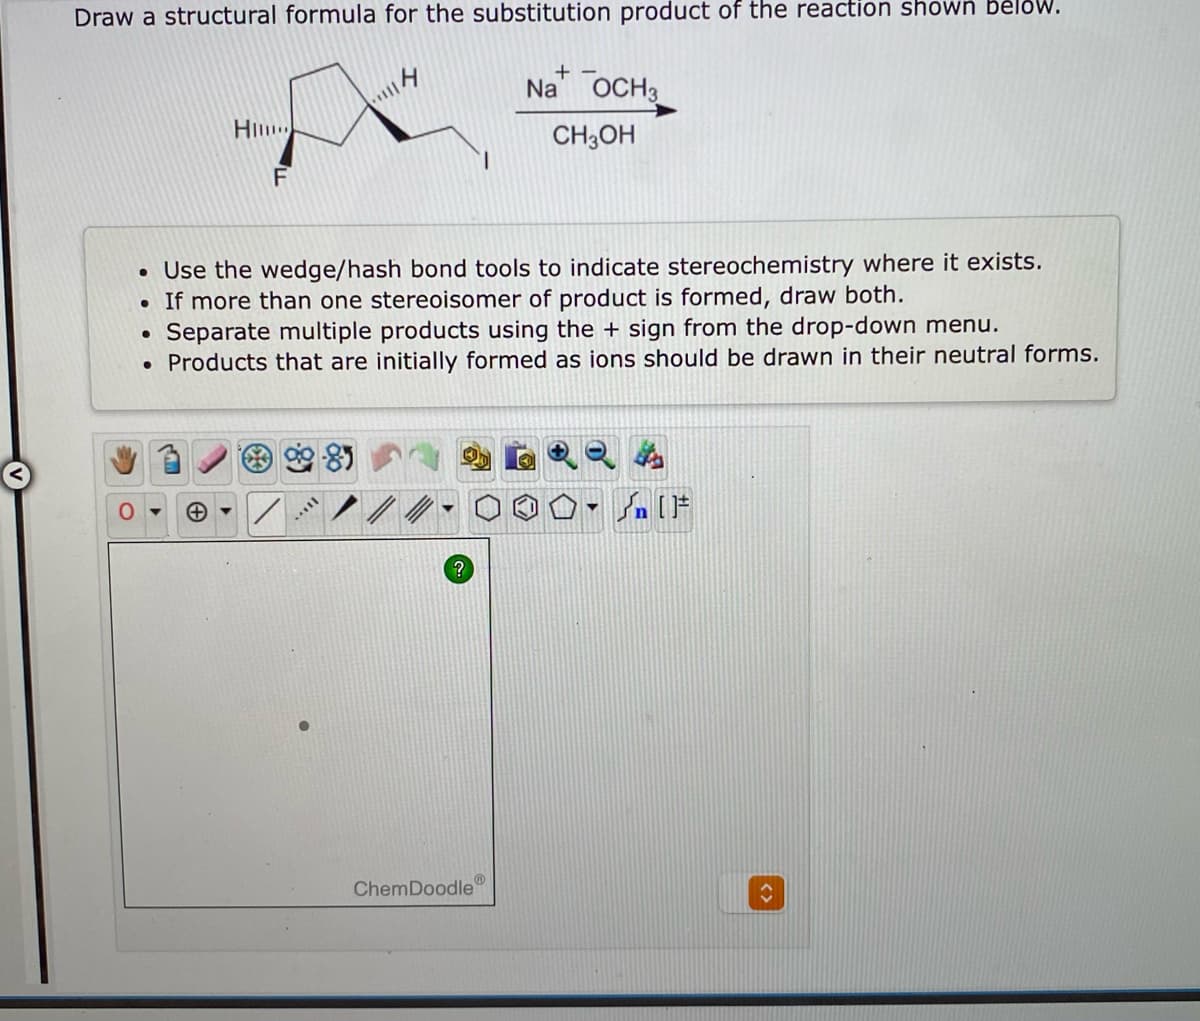 Draw a structural formula for the substitution product of the reaction shown bělow.
Na OCH3
CH3OH
• Use the wedge/hash bond tools to indicate stereochemistry where it exists.
• If more than one stereoisomer of product is formed, draw both.
Separate multiple products using the + sign from the drop-down menu.
• Products that are initially formed as ions should be drawn in their neutral forms.
ChemDoodle
